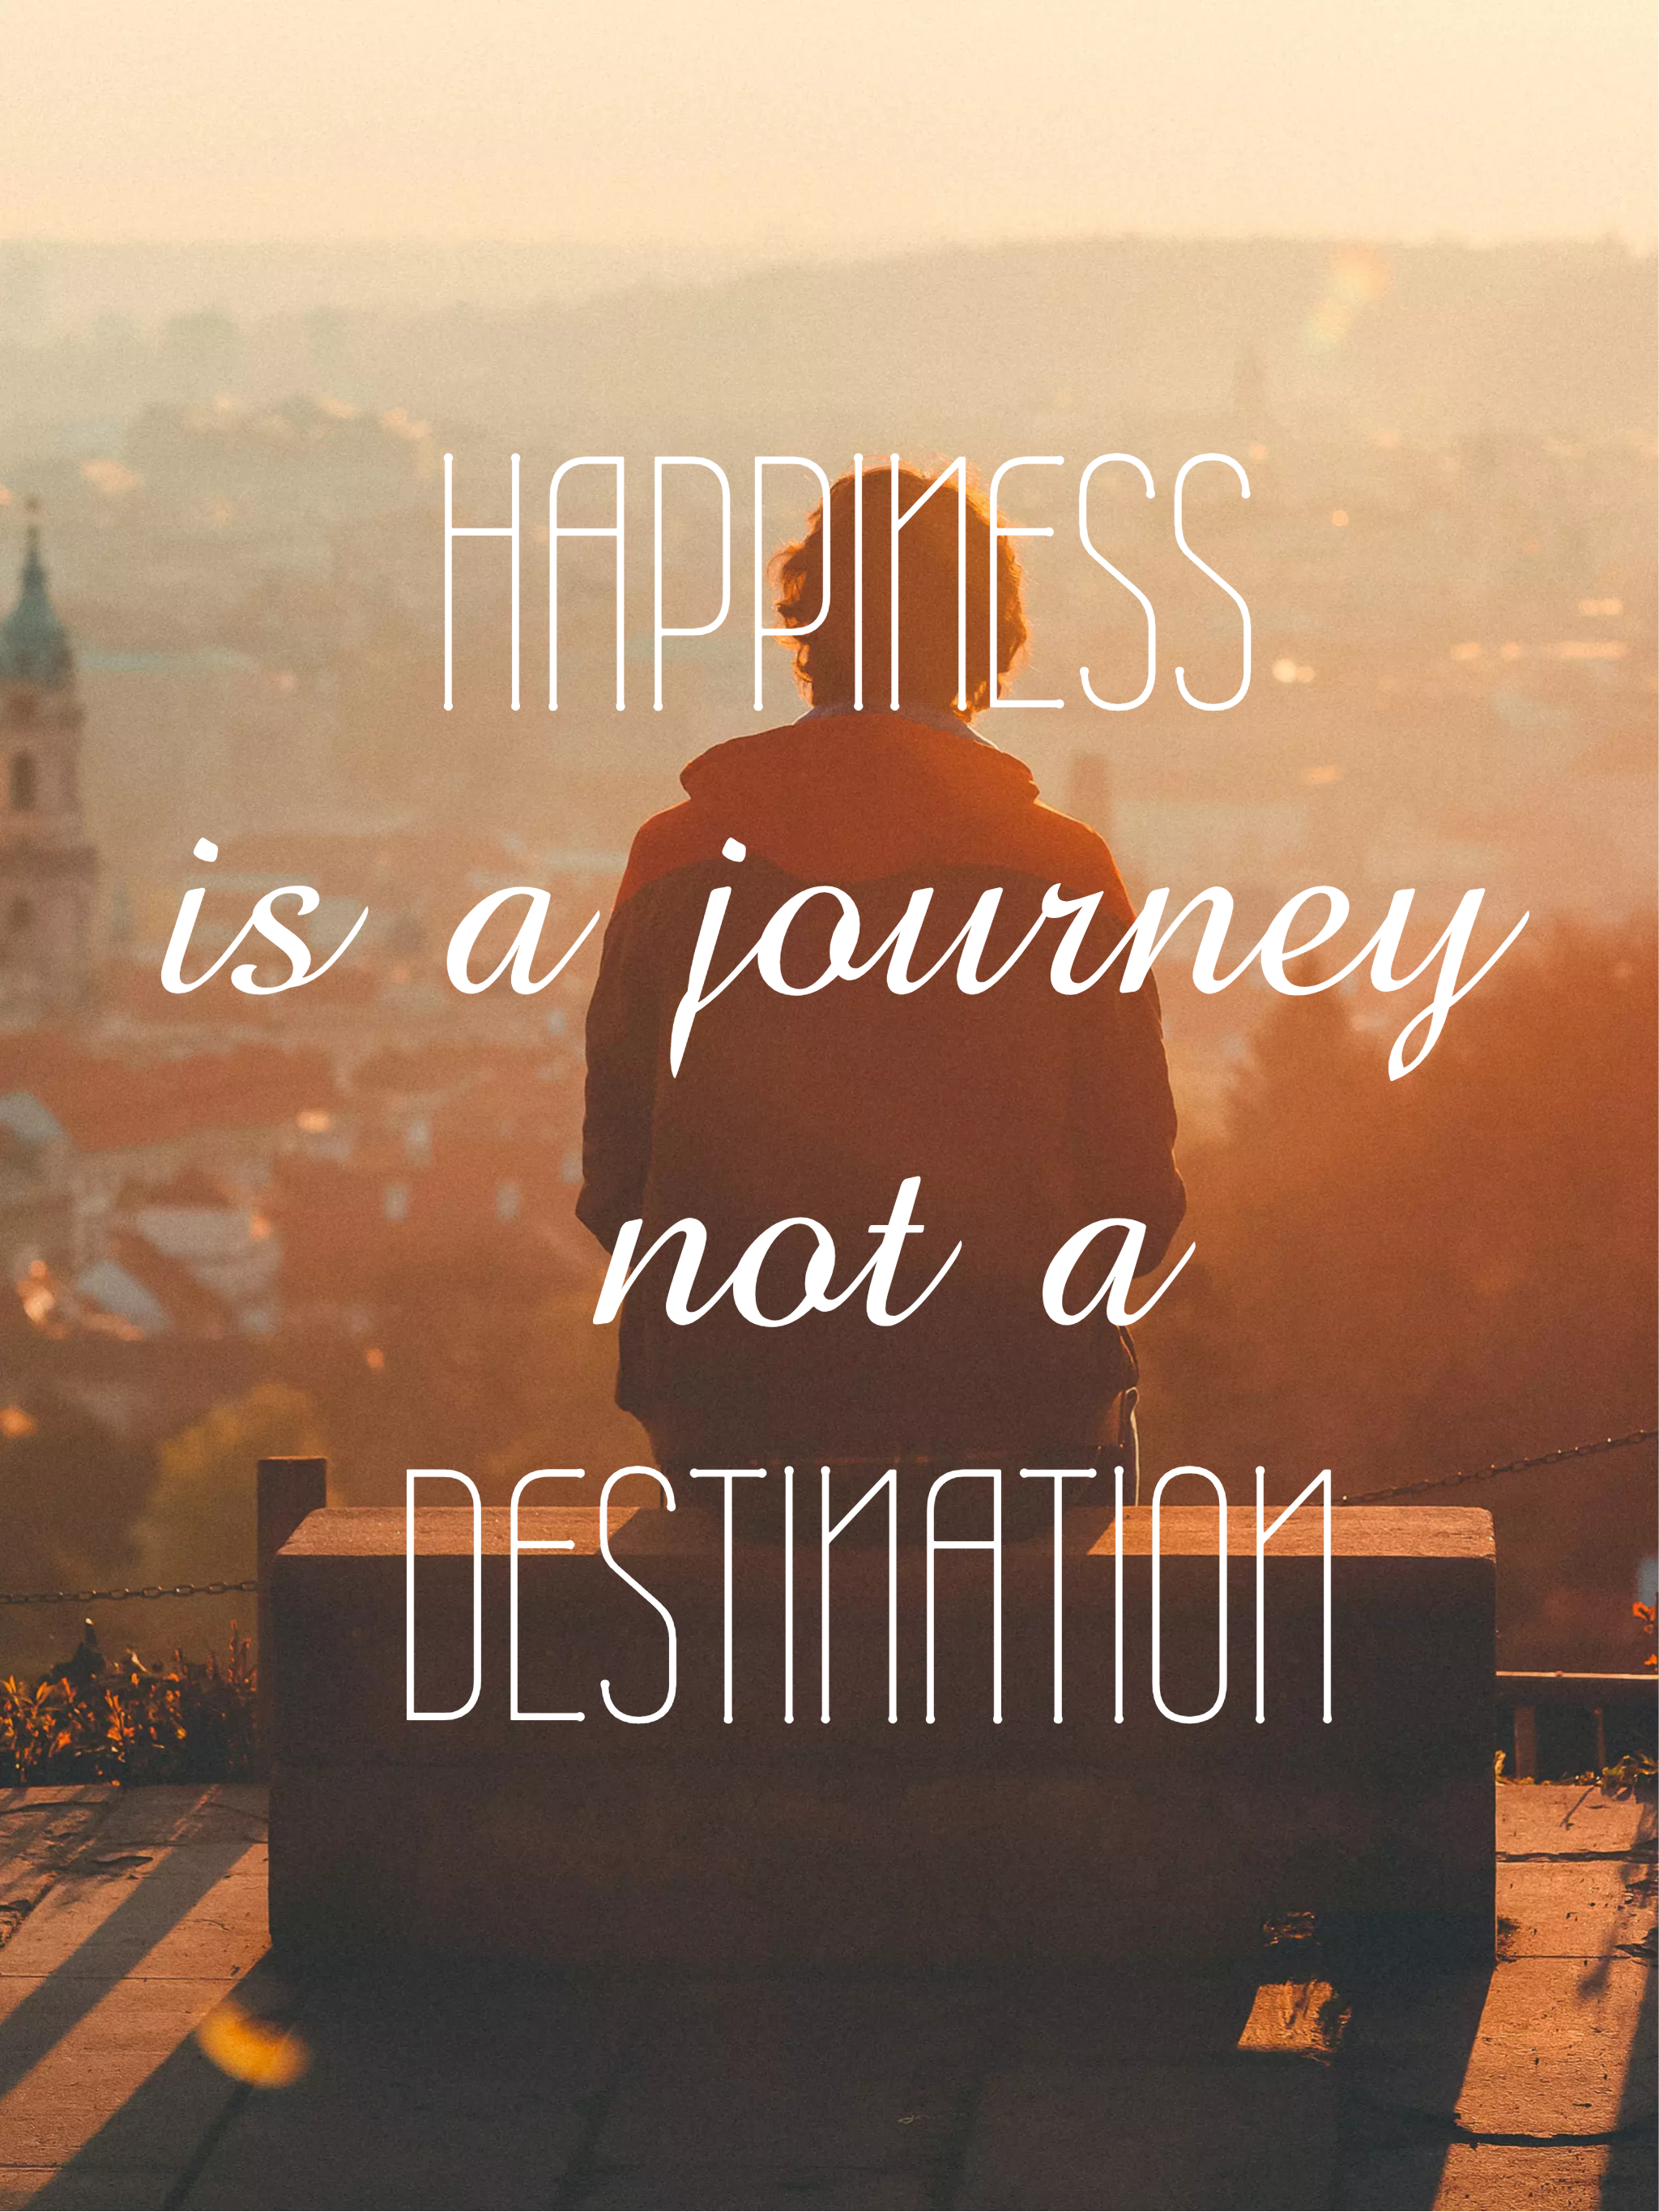 is happiness journey or destination